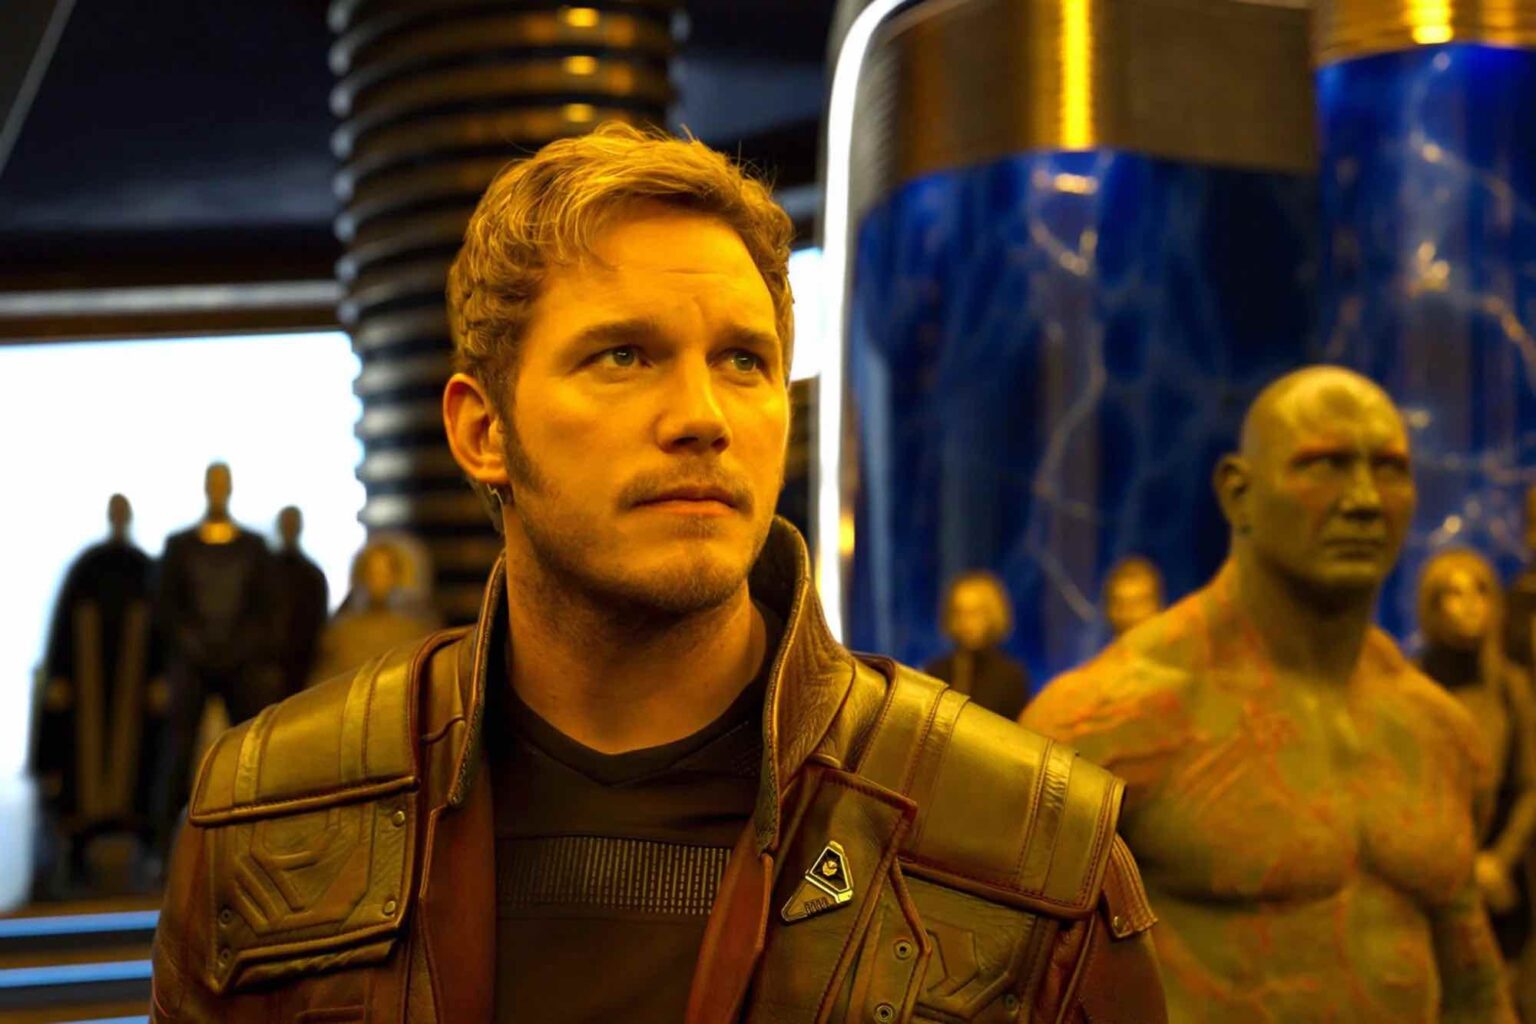 Will Chris Pratt return to 'Guardians of the Galaxy Vol. 3' after Marvel Comic's news? Read all about Star-Lord's sexual identity here.